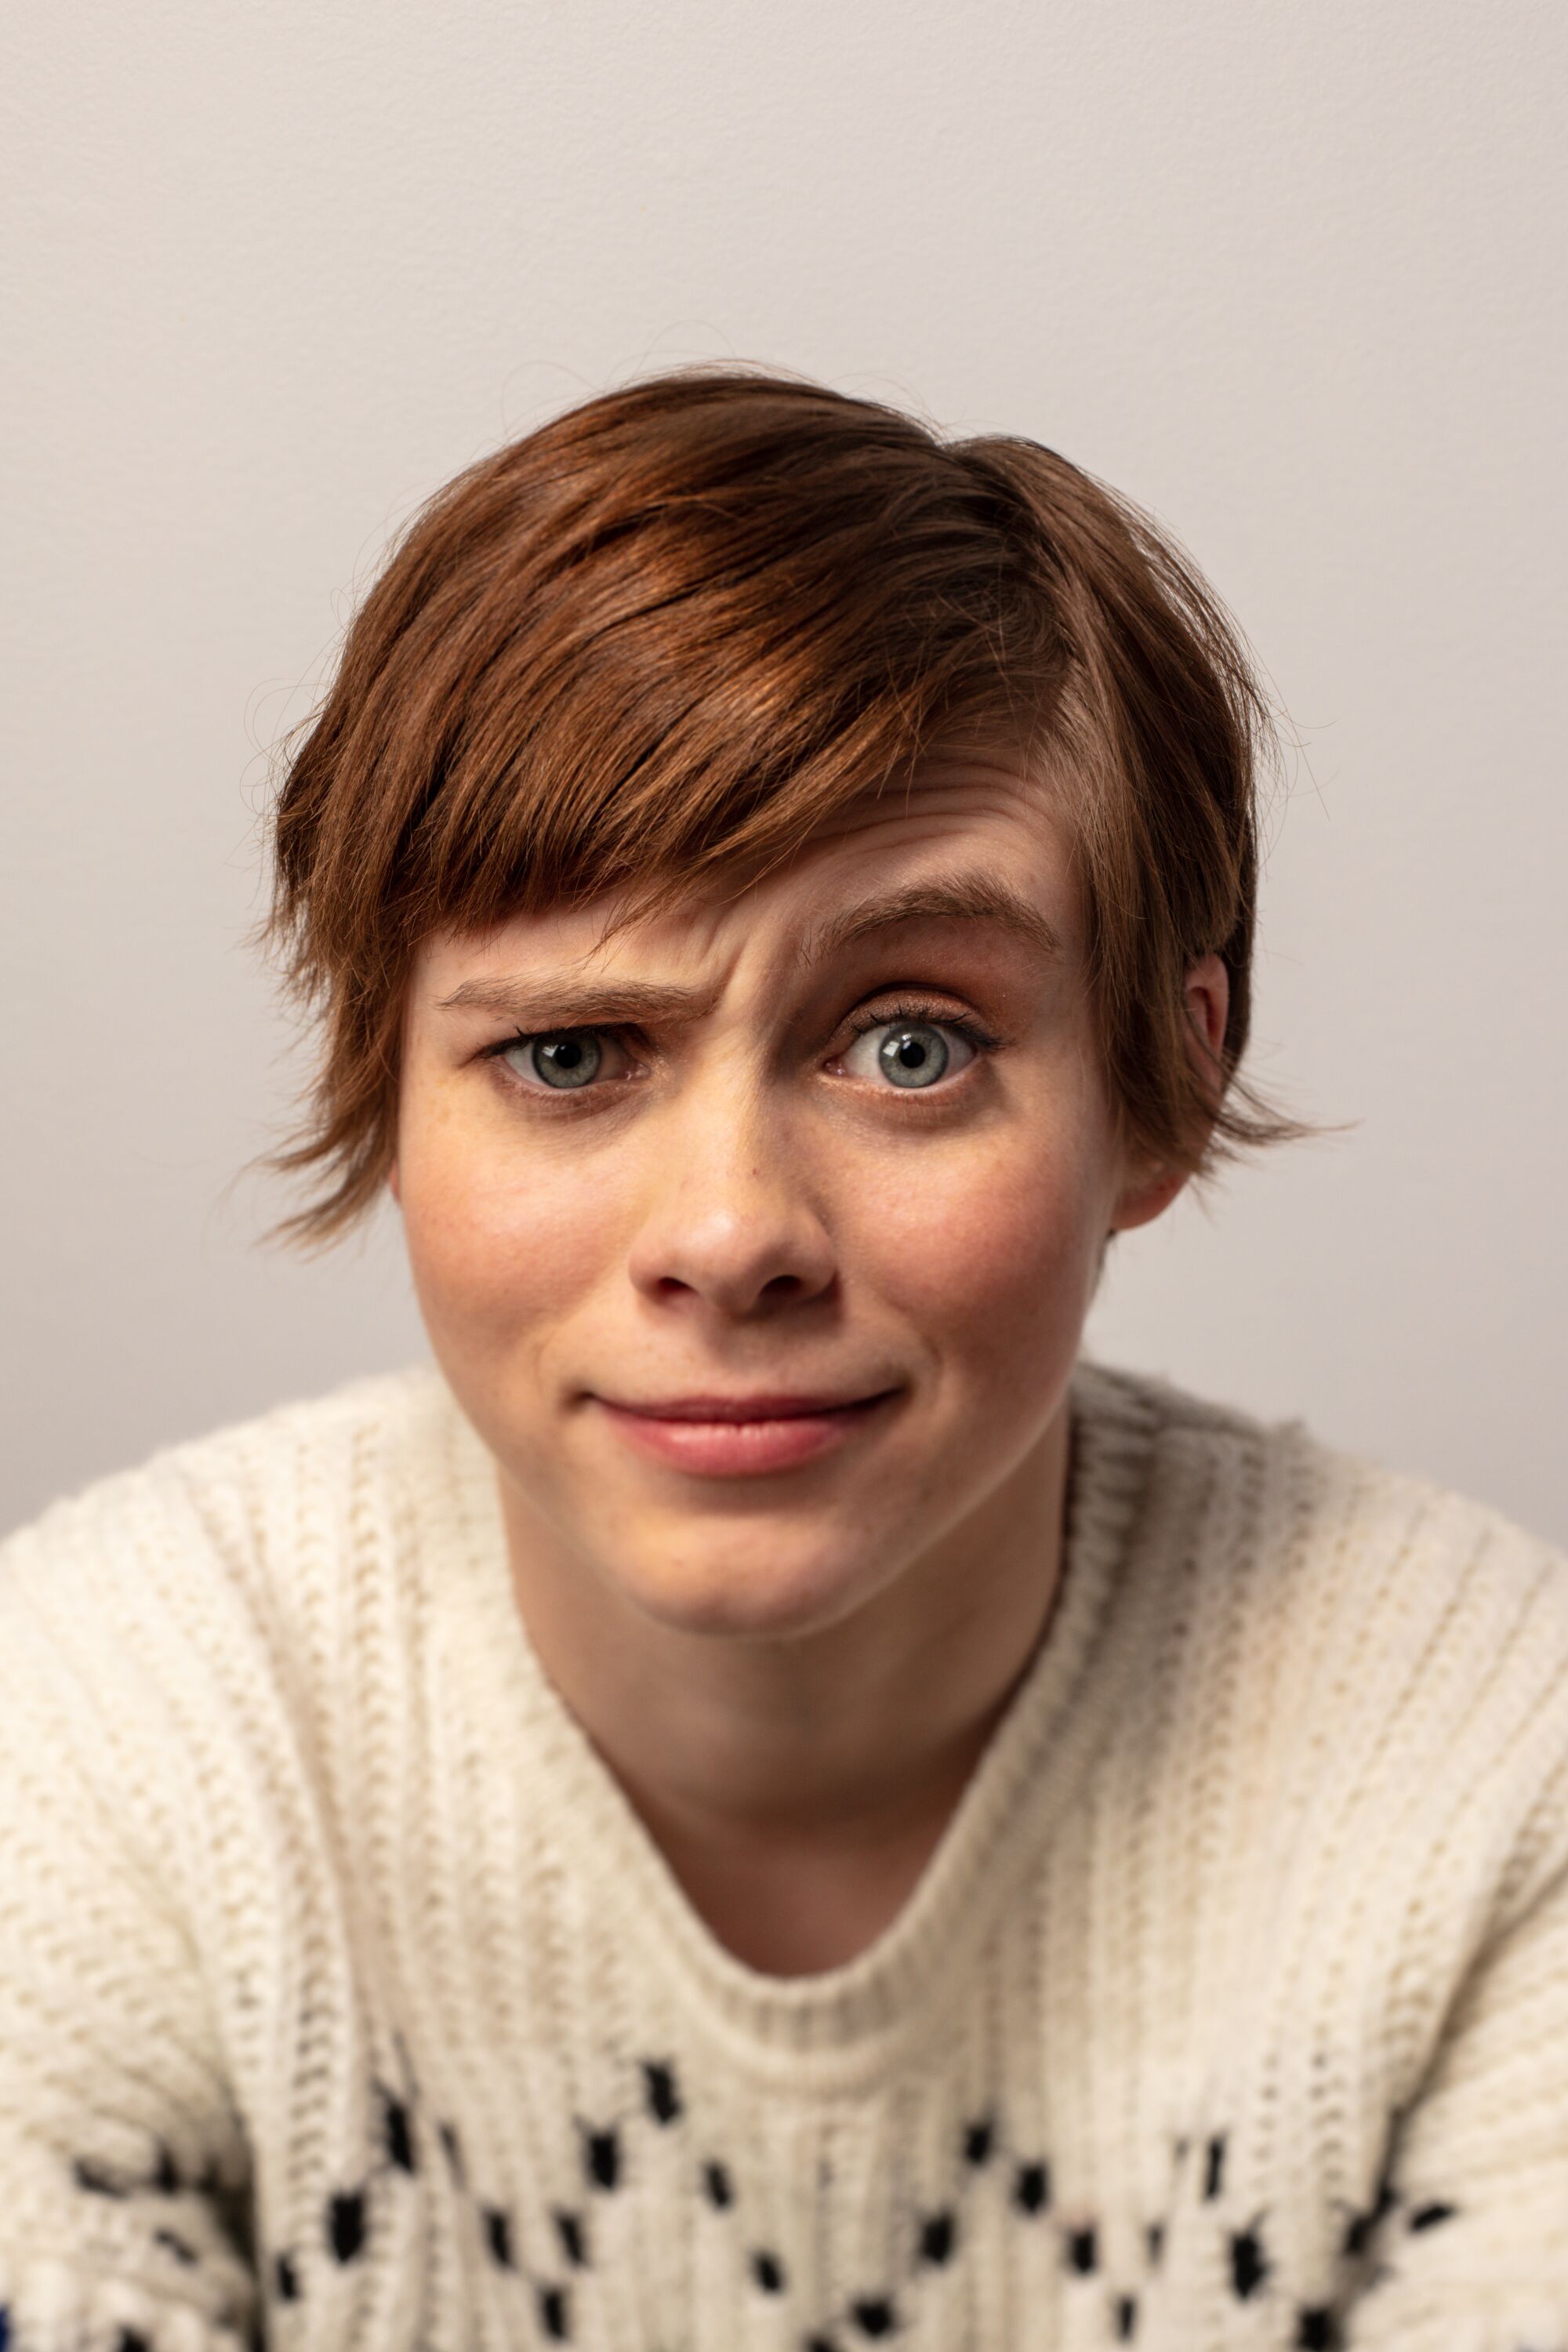 Actor Sophia Lillis of “Uncle Frank,” photographed in the L.A. Times Studio at the Sundance Film Festival.